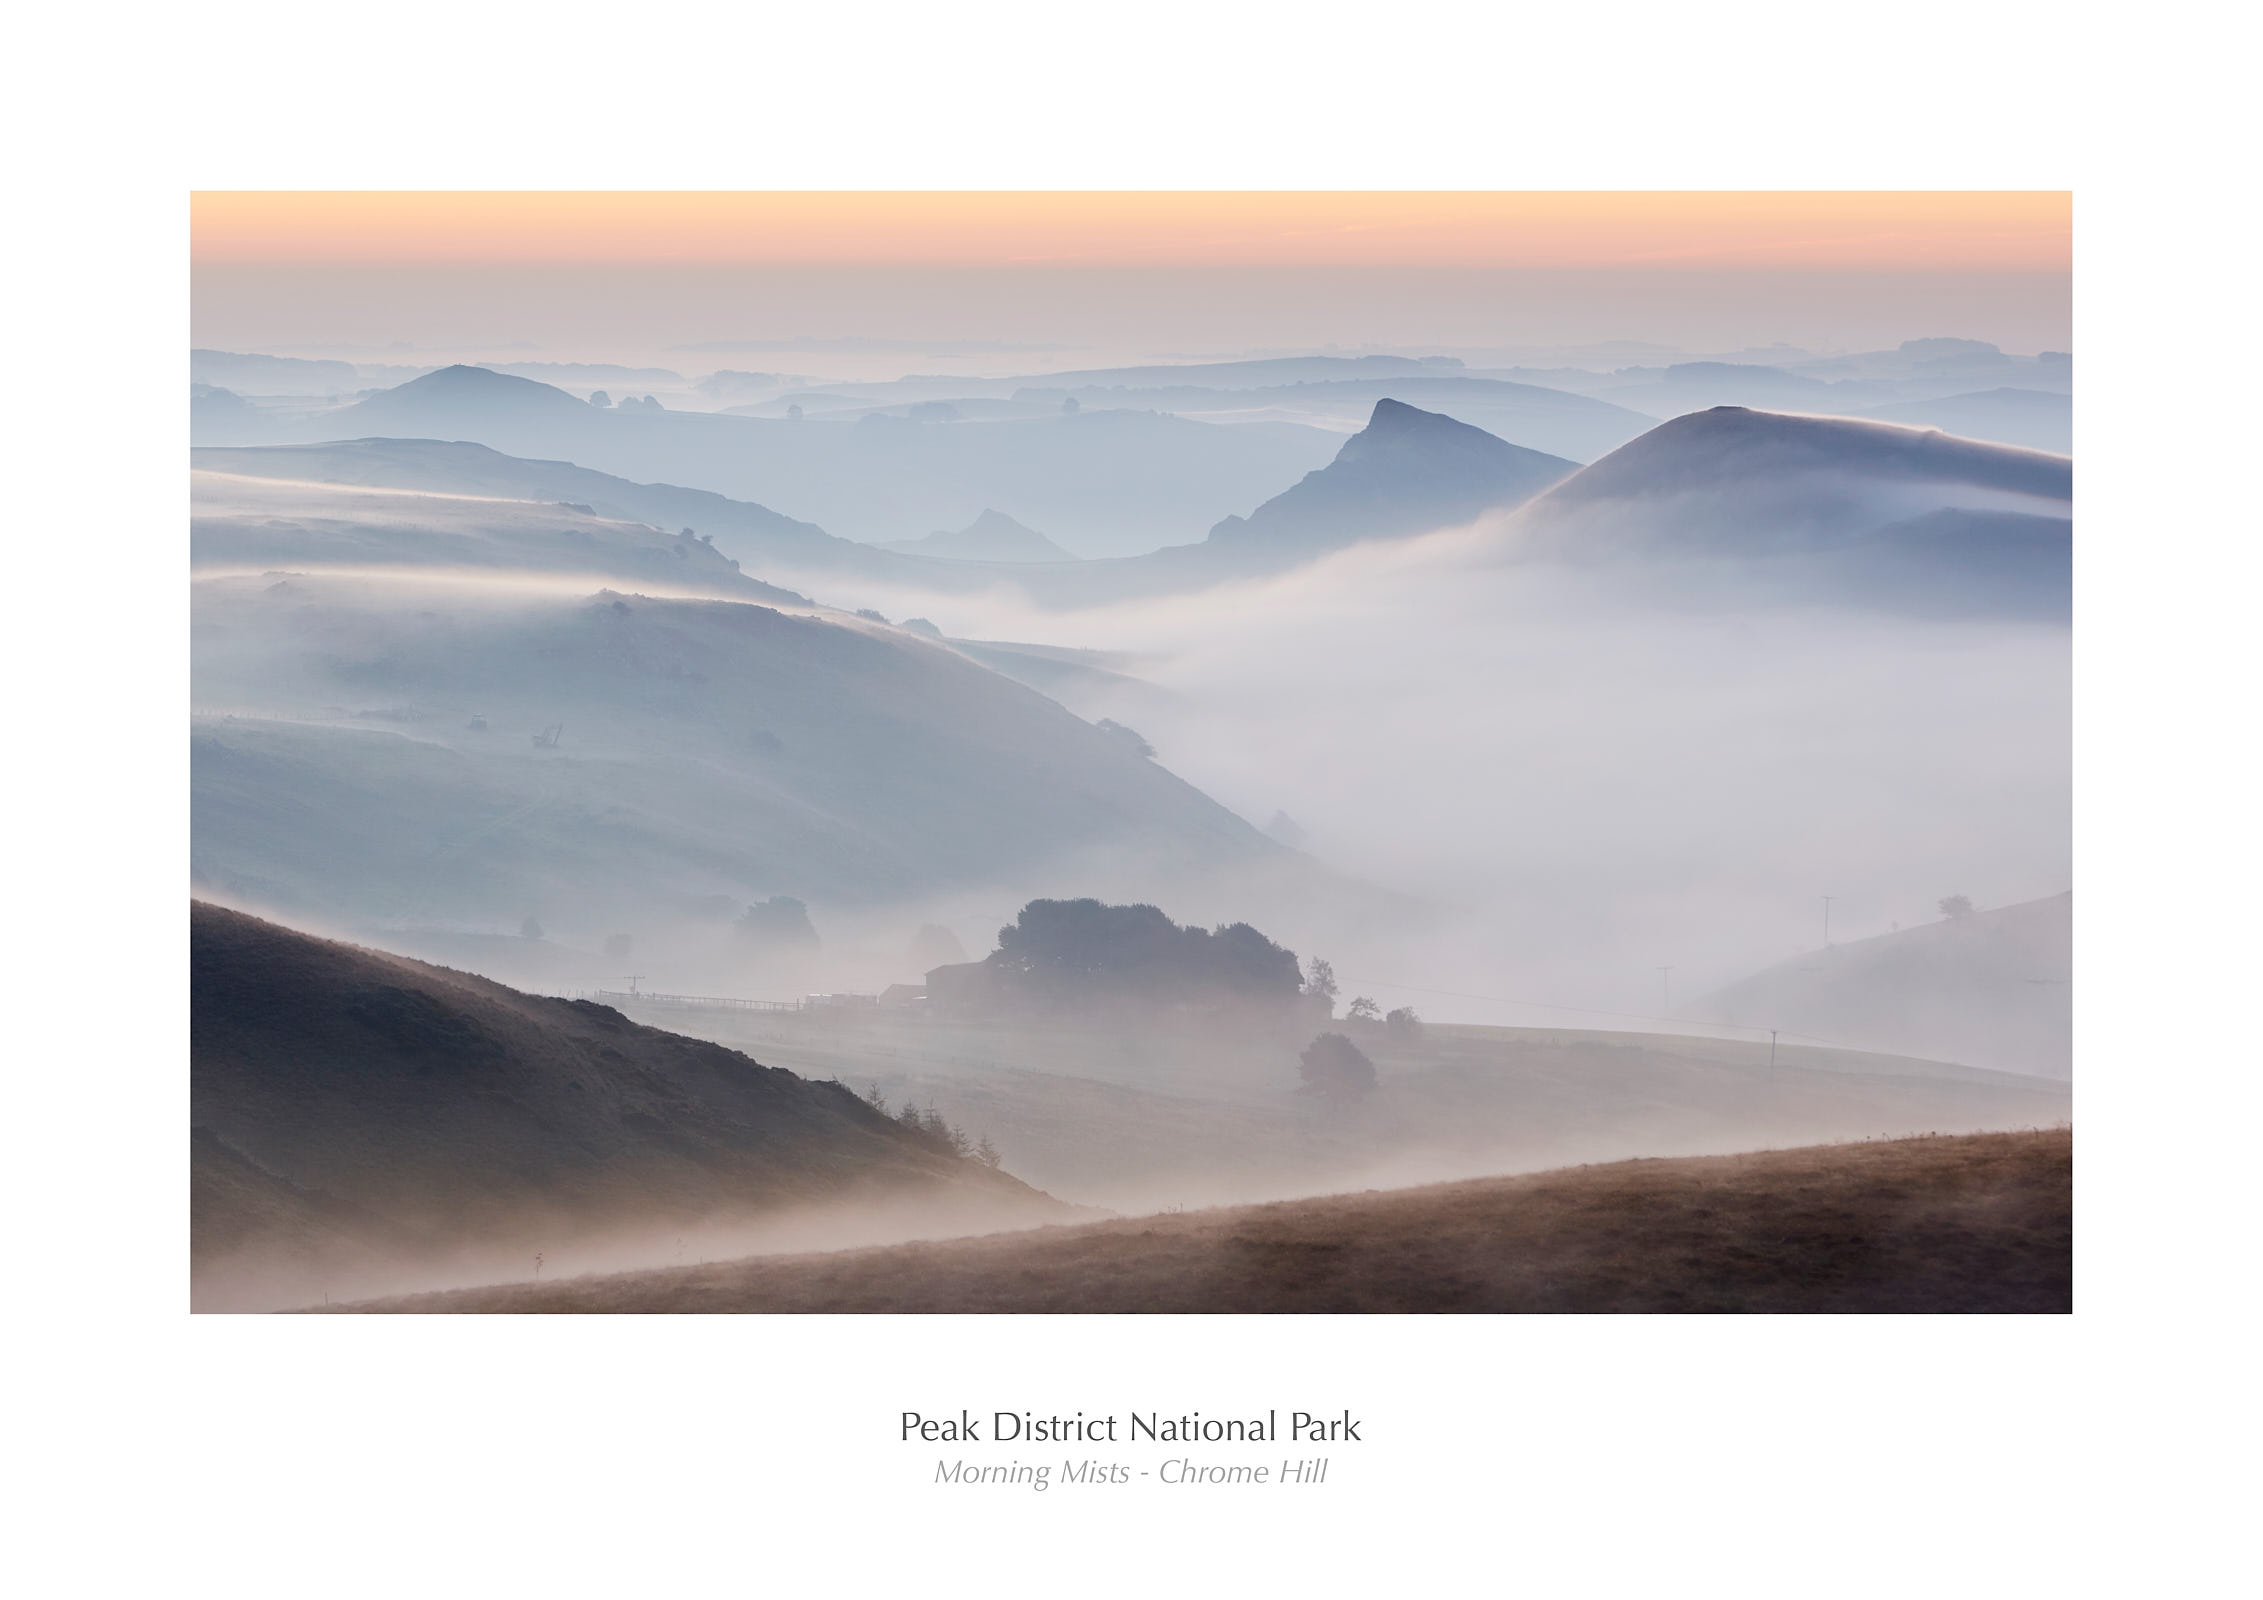 Morning Mists - Chrome Hill